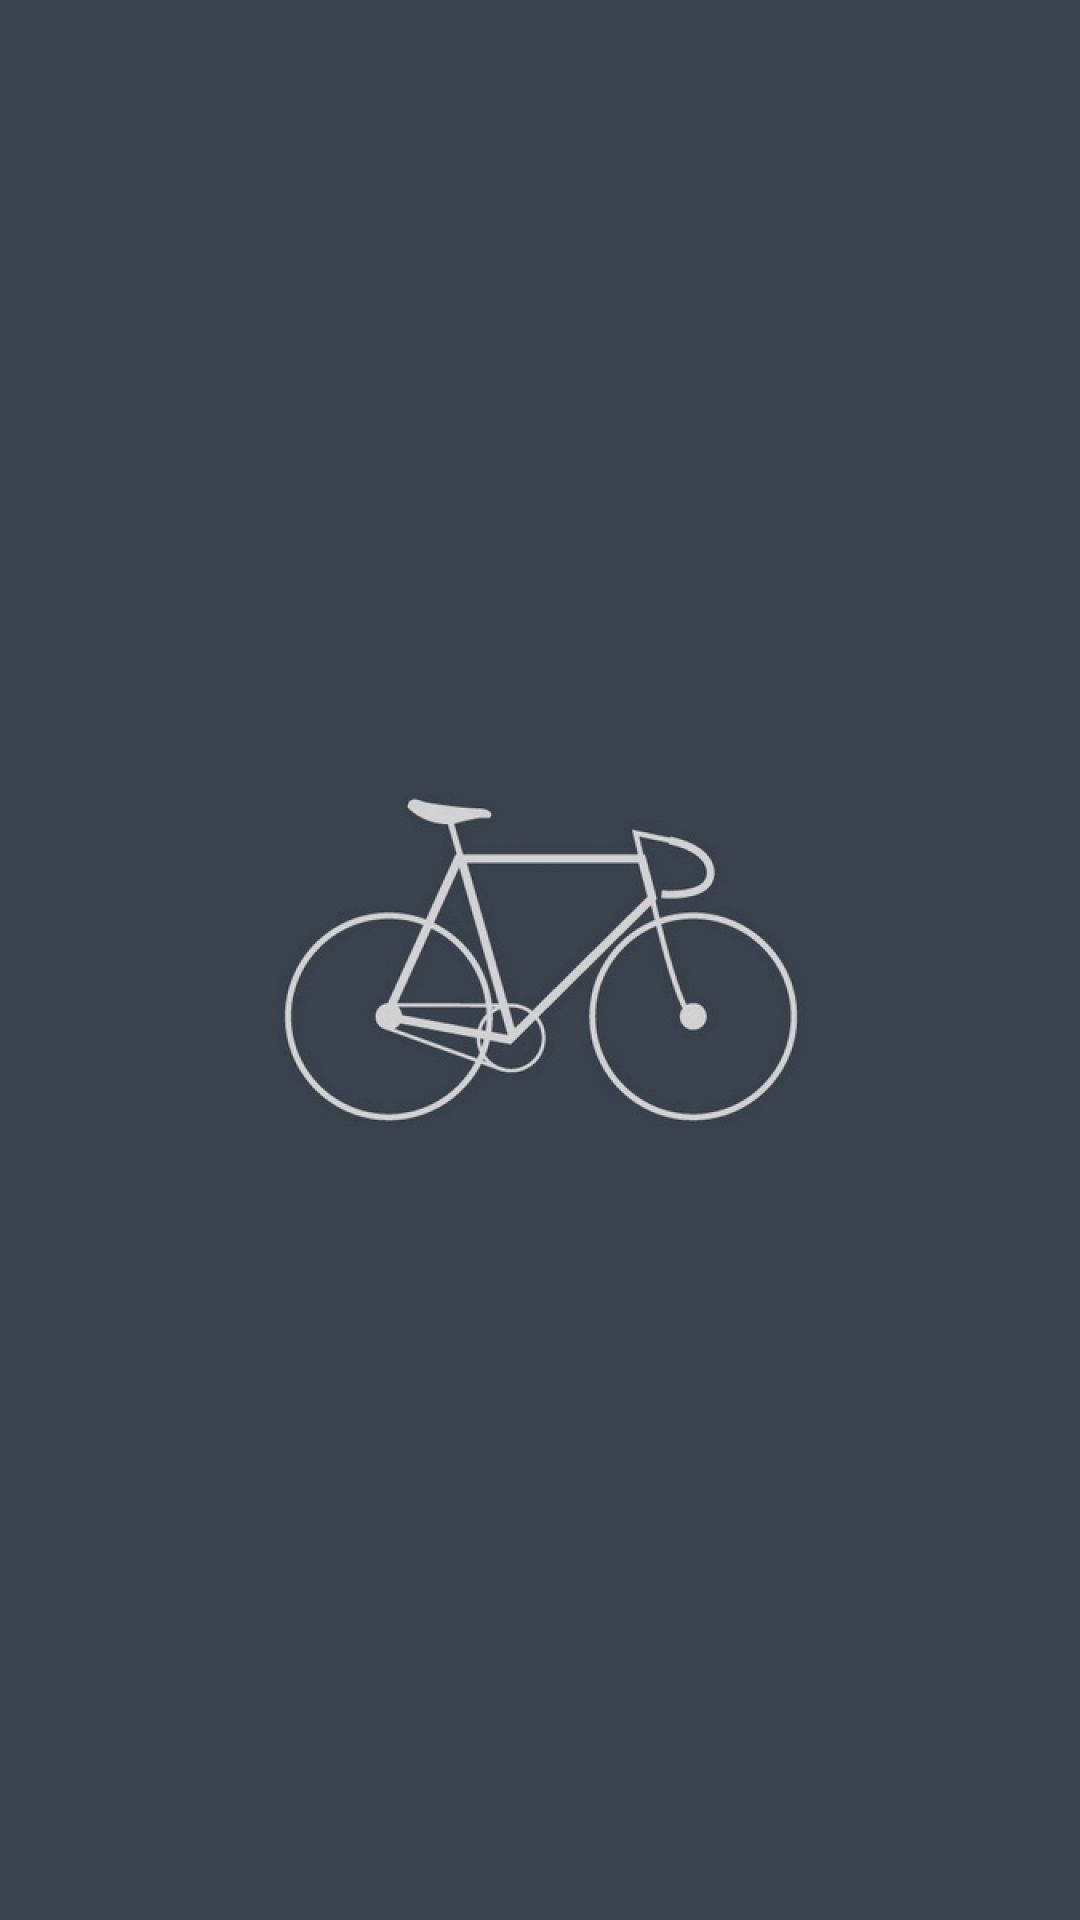 Simple Graphic Art Bicycle Iphone Wallpaper